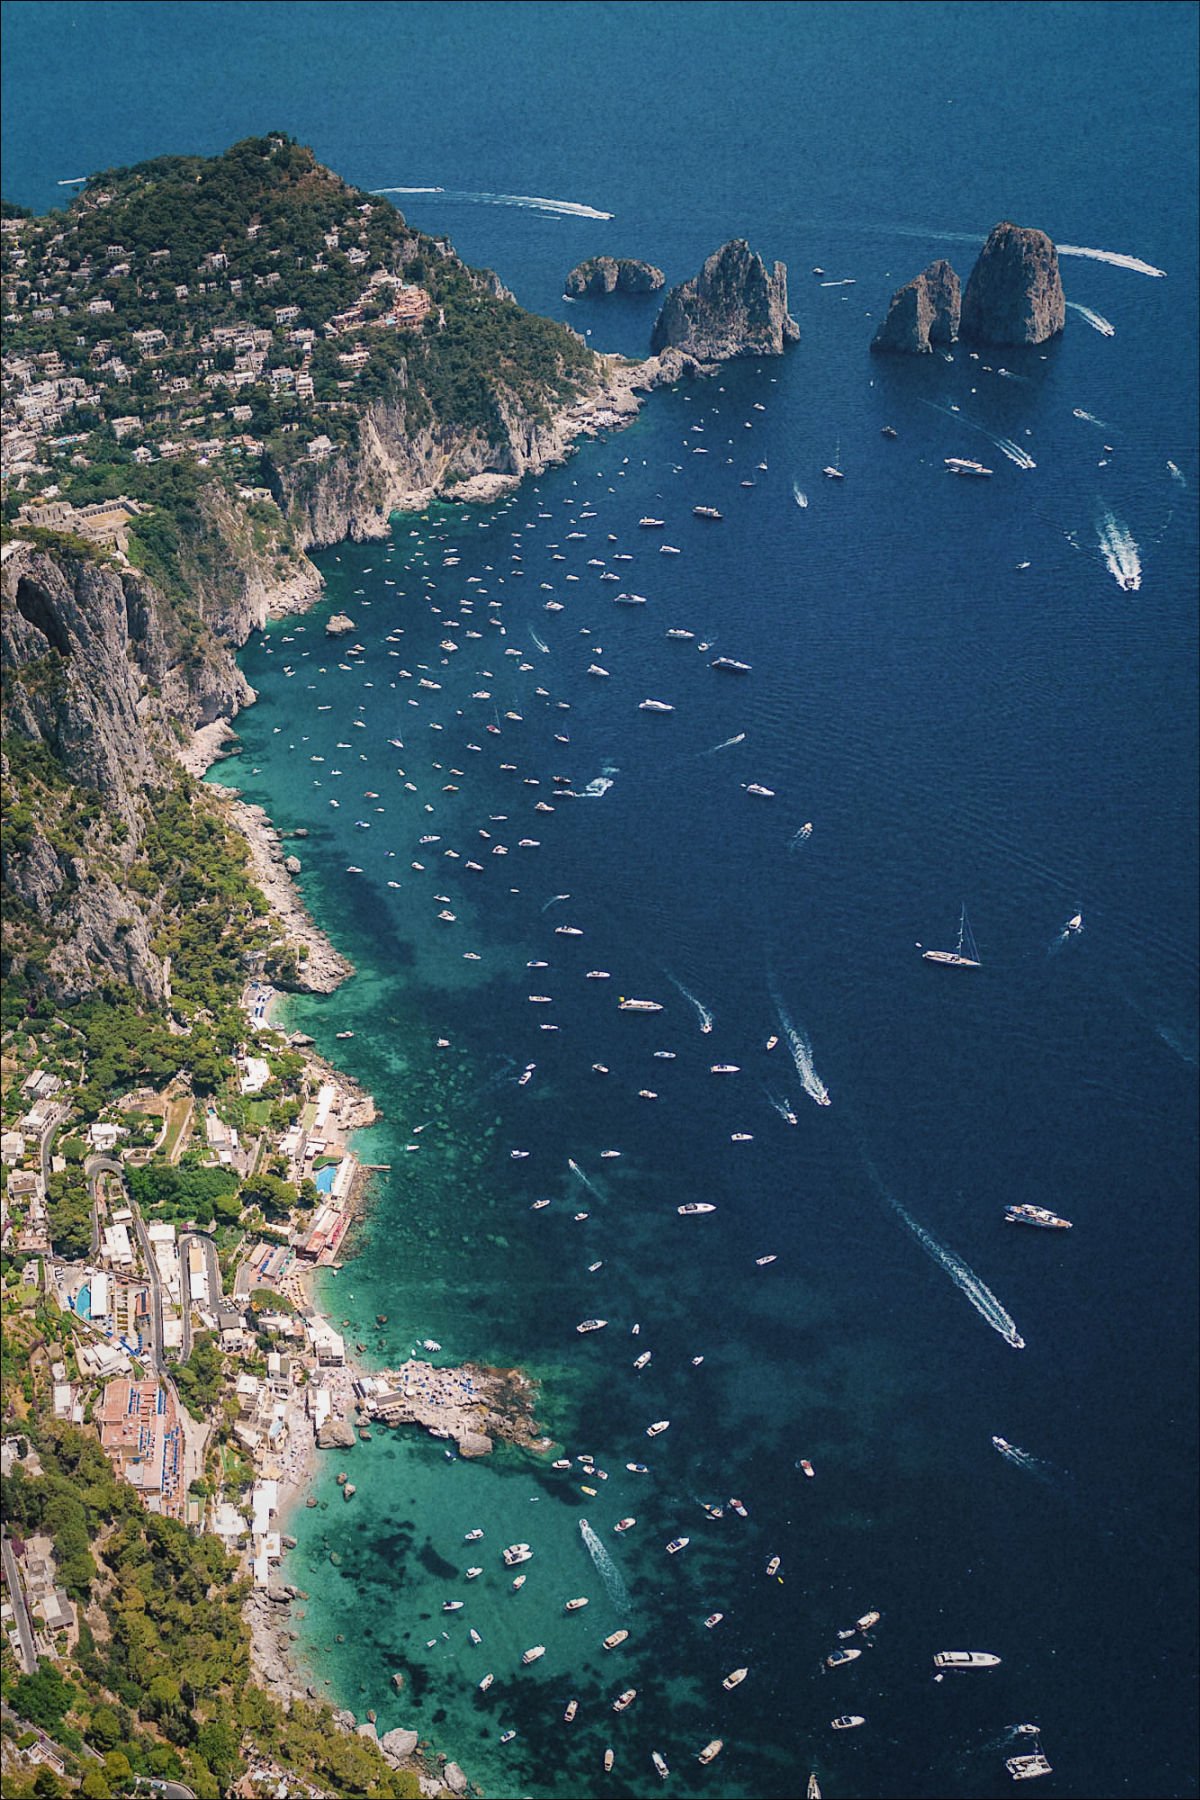 A day trip to Capri from Positano is one of the best things to do in Positano